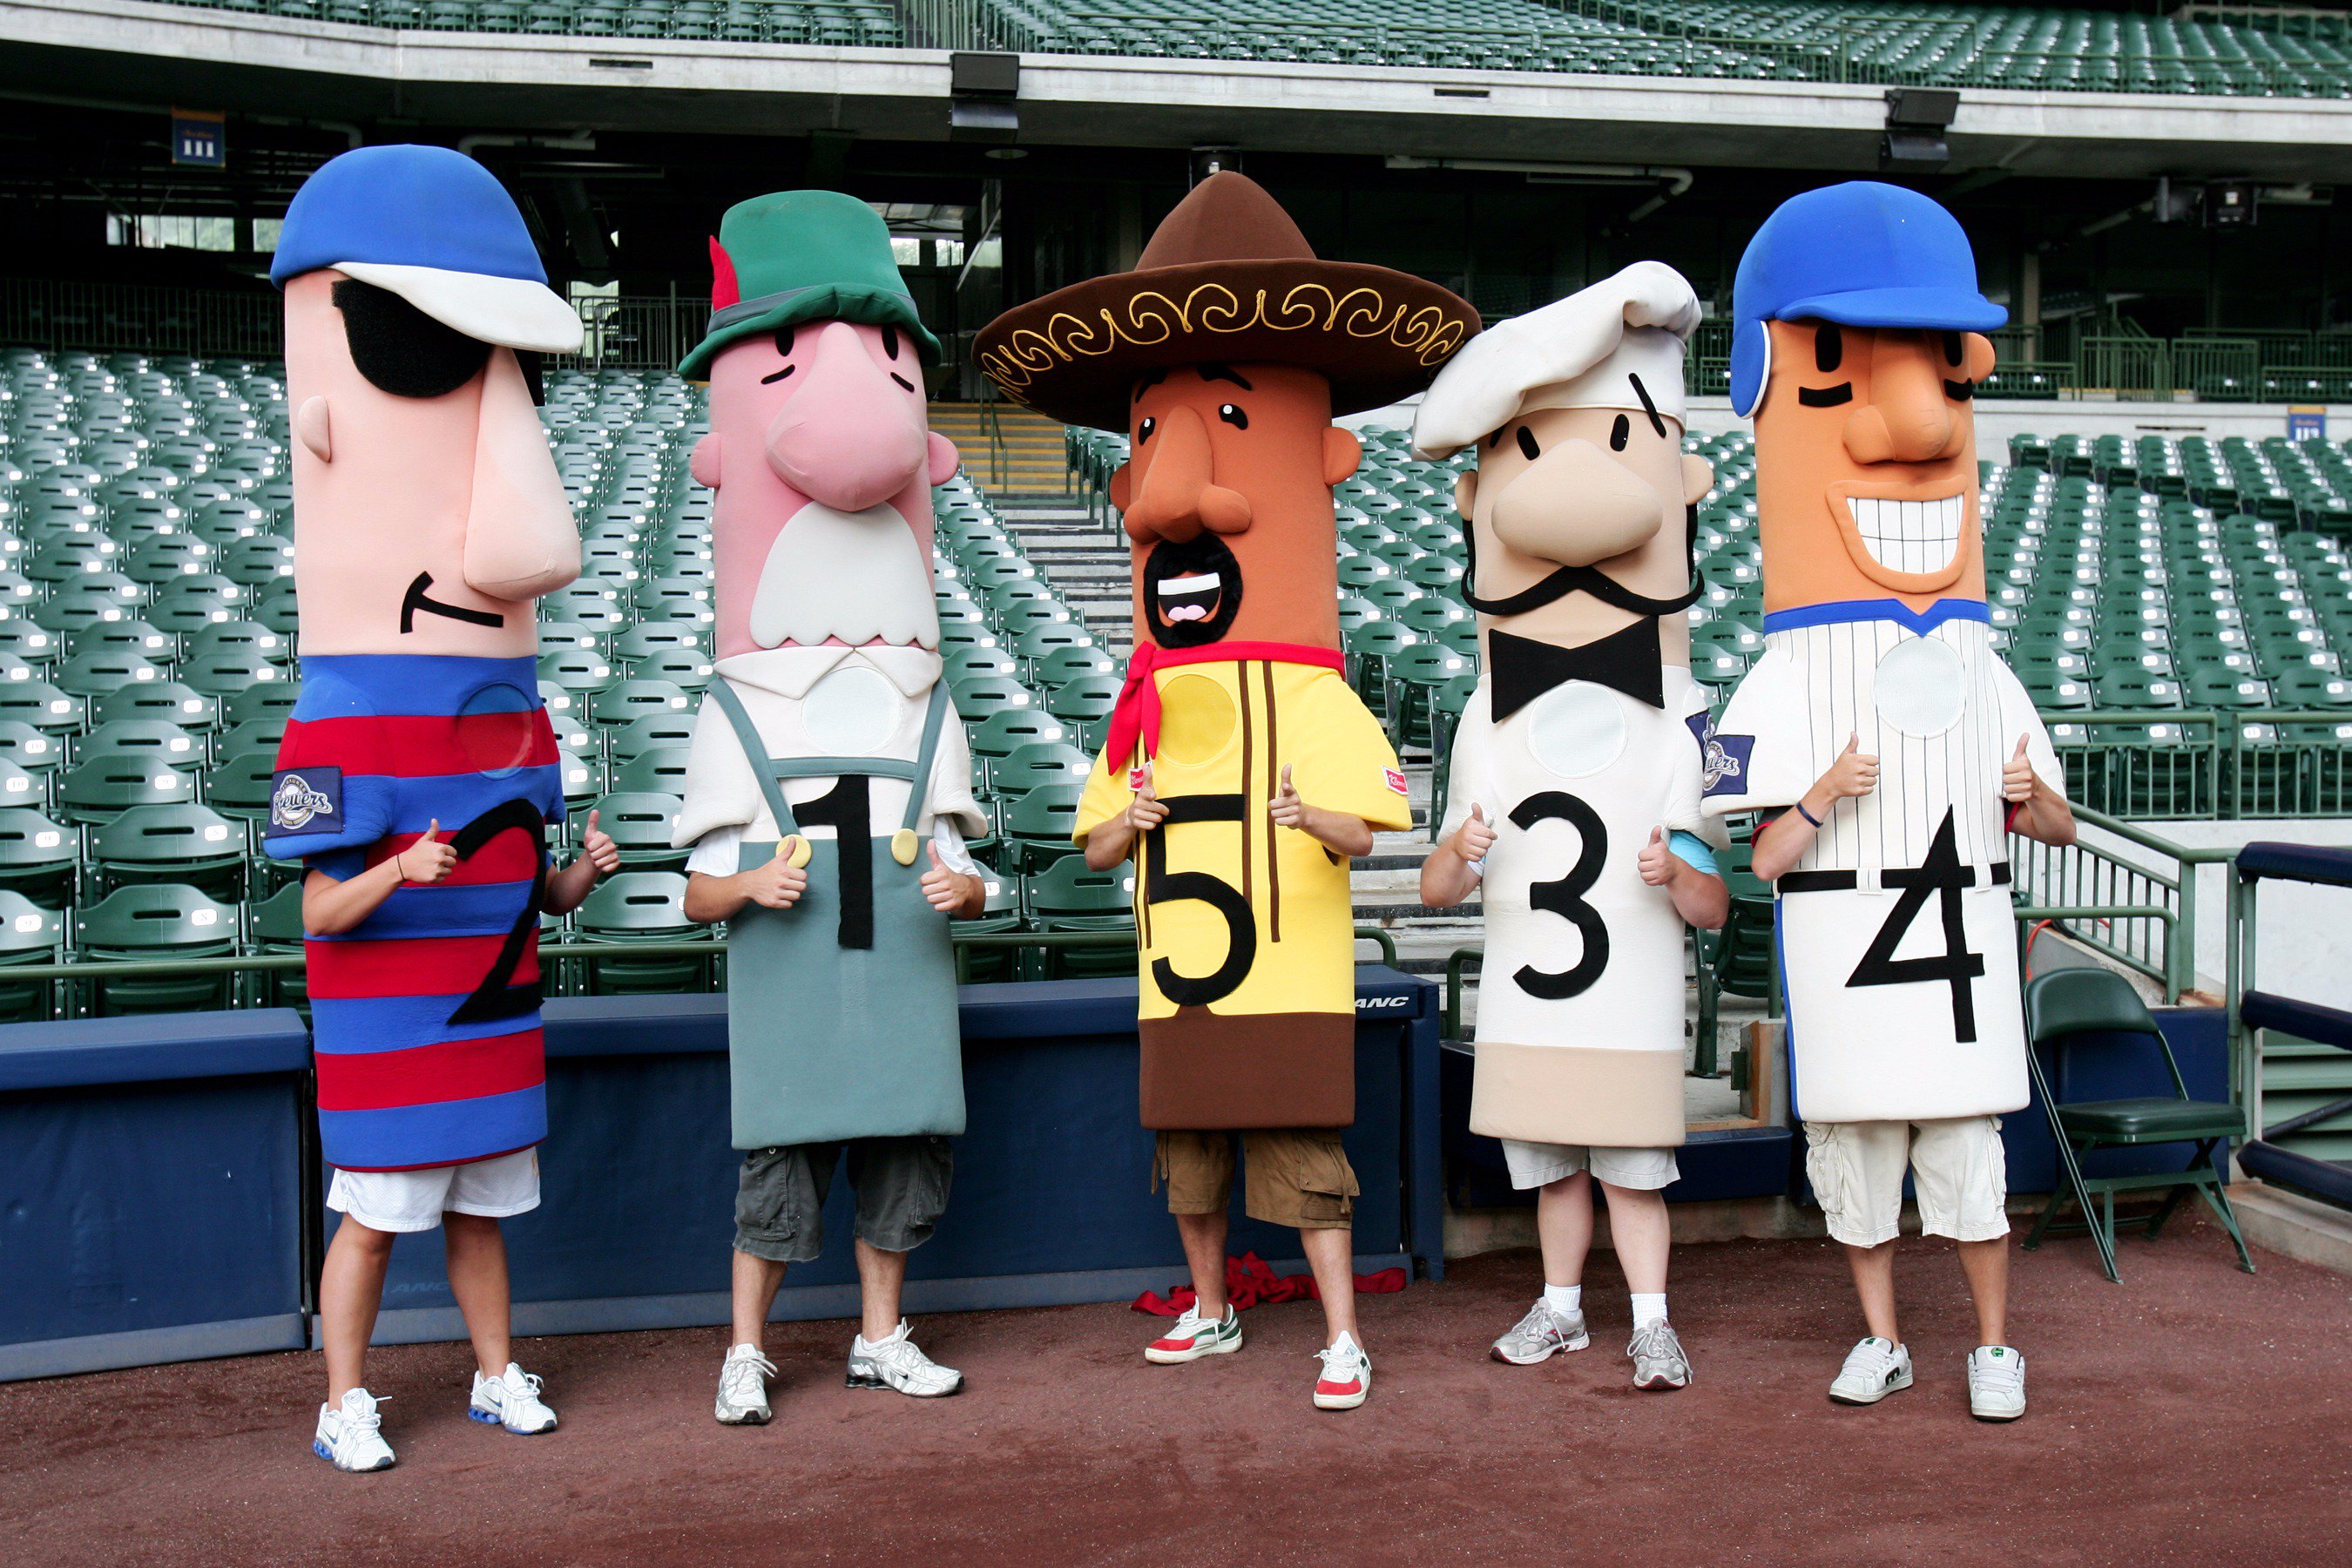 The Sausage Race!!, Taken at last night's Milwaukee Brewers…